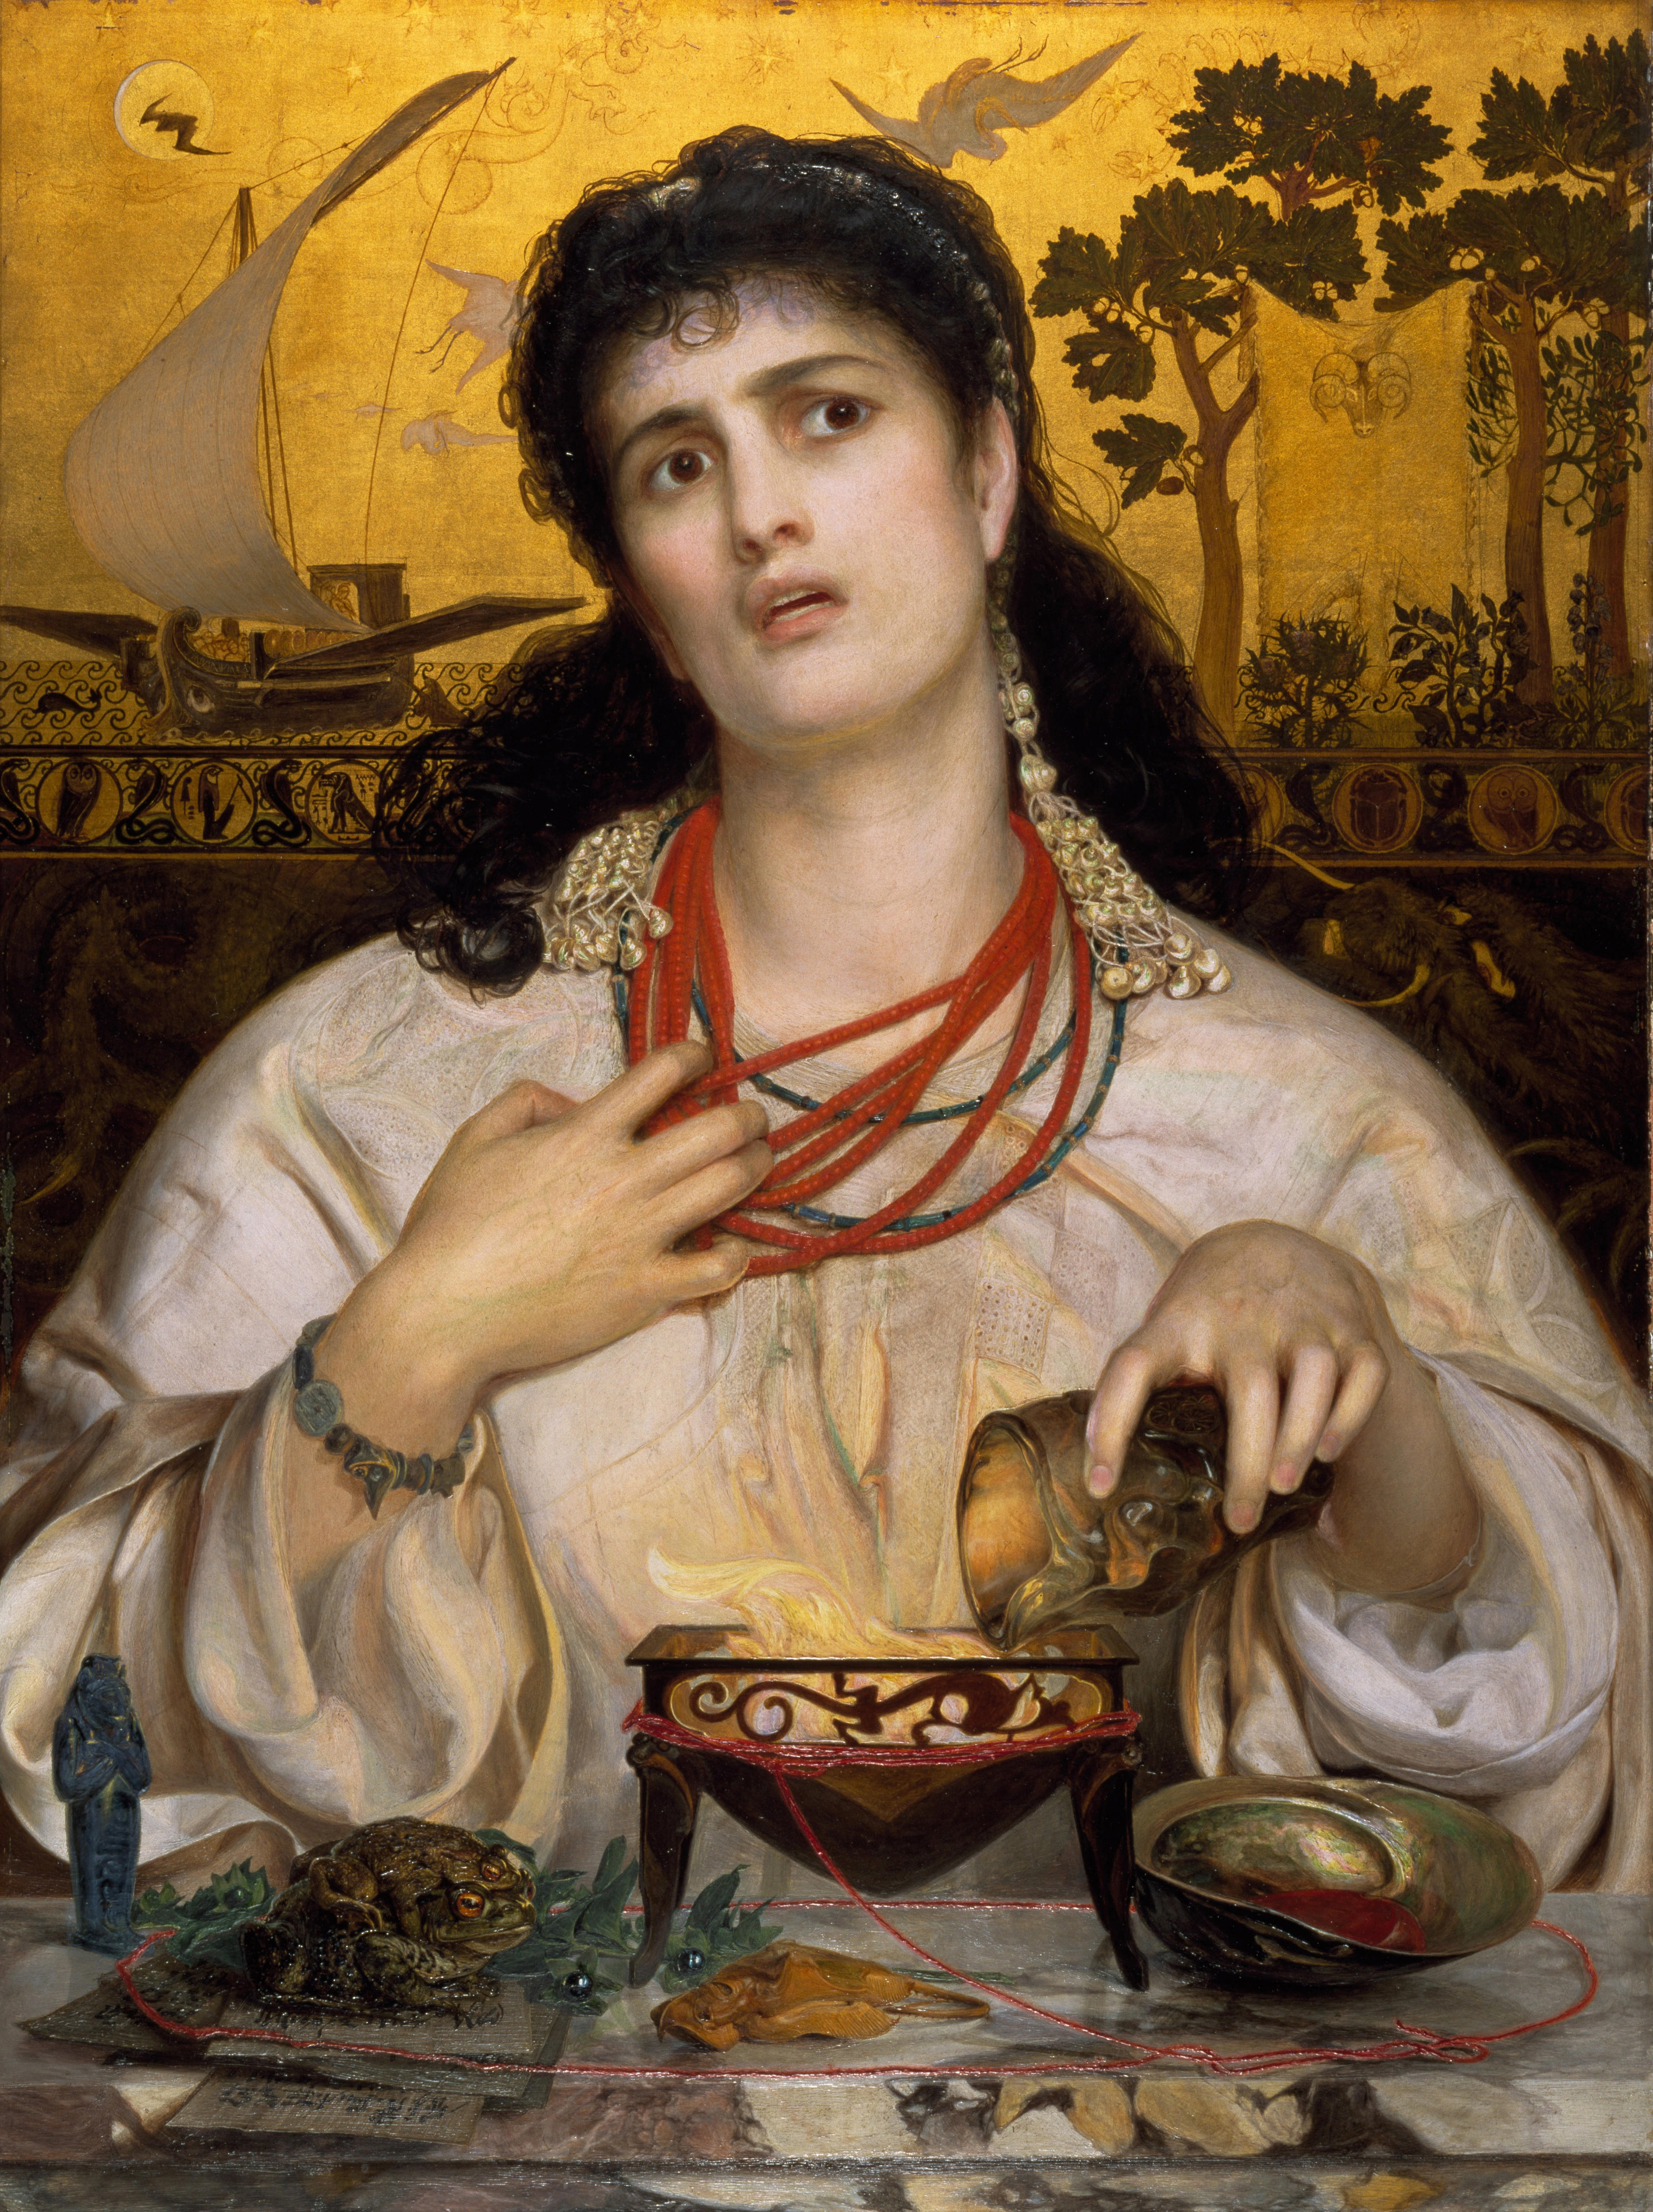 Colour painting of woman with pained expression, pulling at red necklace around her neck and pouring liquid into flaming bowl.